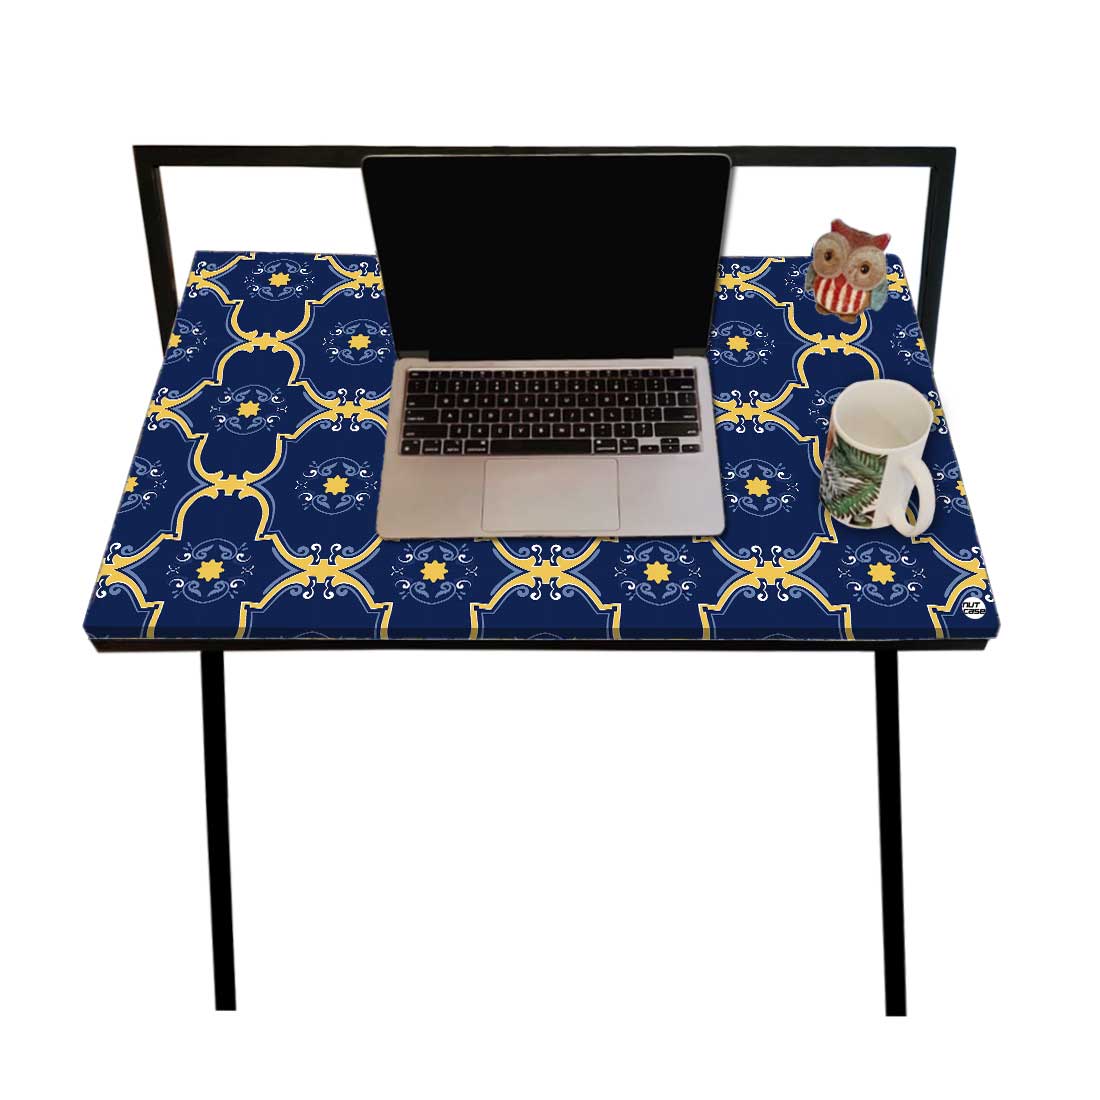 Foldable Mini Study Table for Work from Home - Spanish Design Nutcase